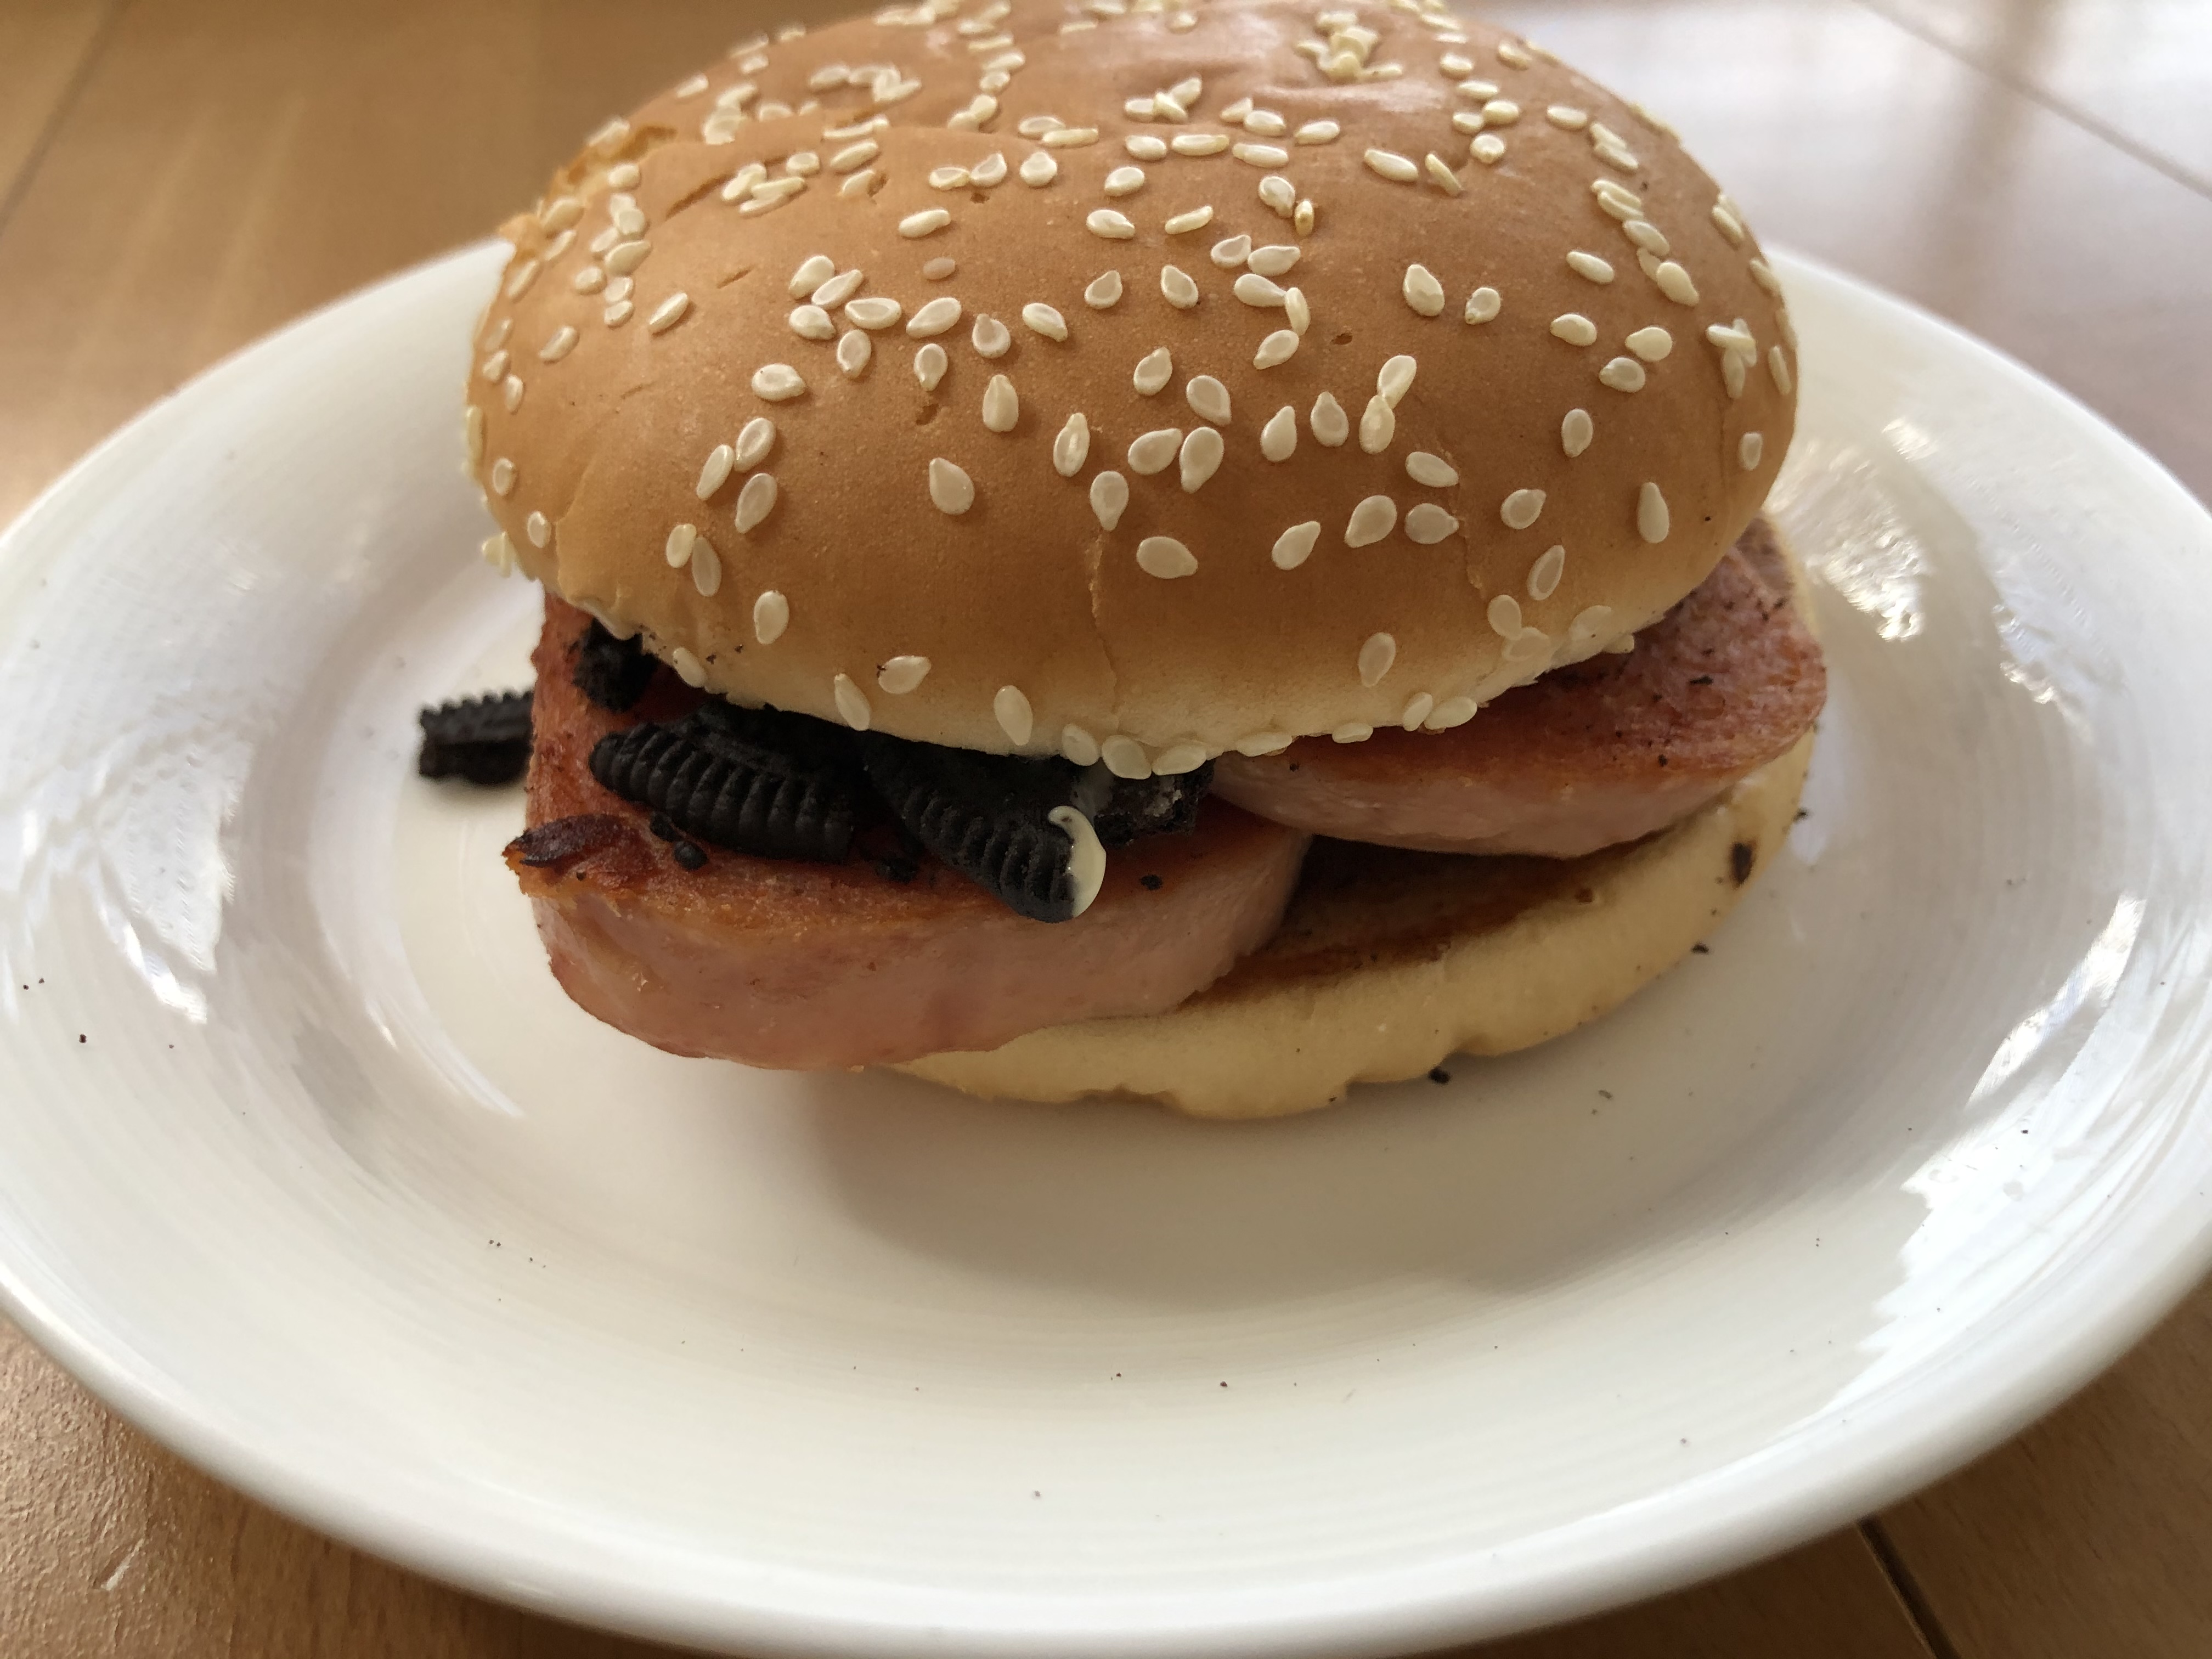 Let’s try making our own Chinese McDonald’s Oreo-Spam burgers